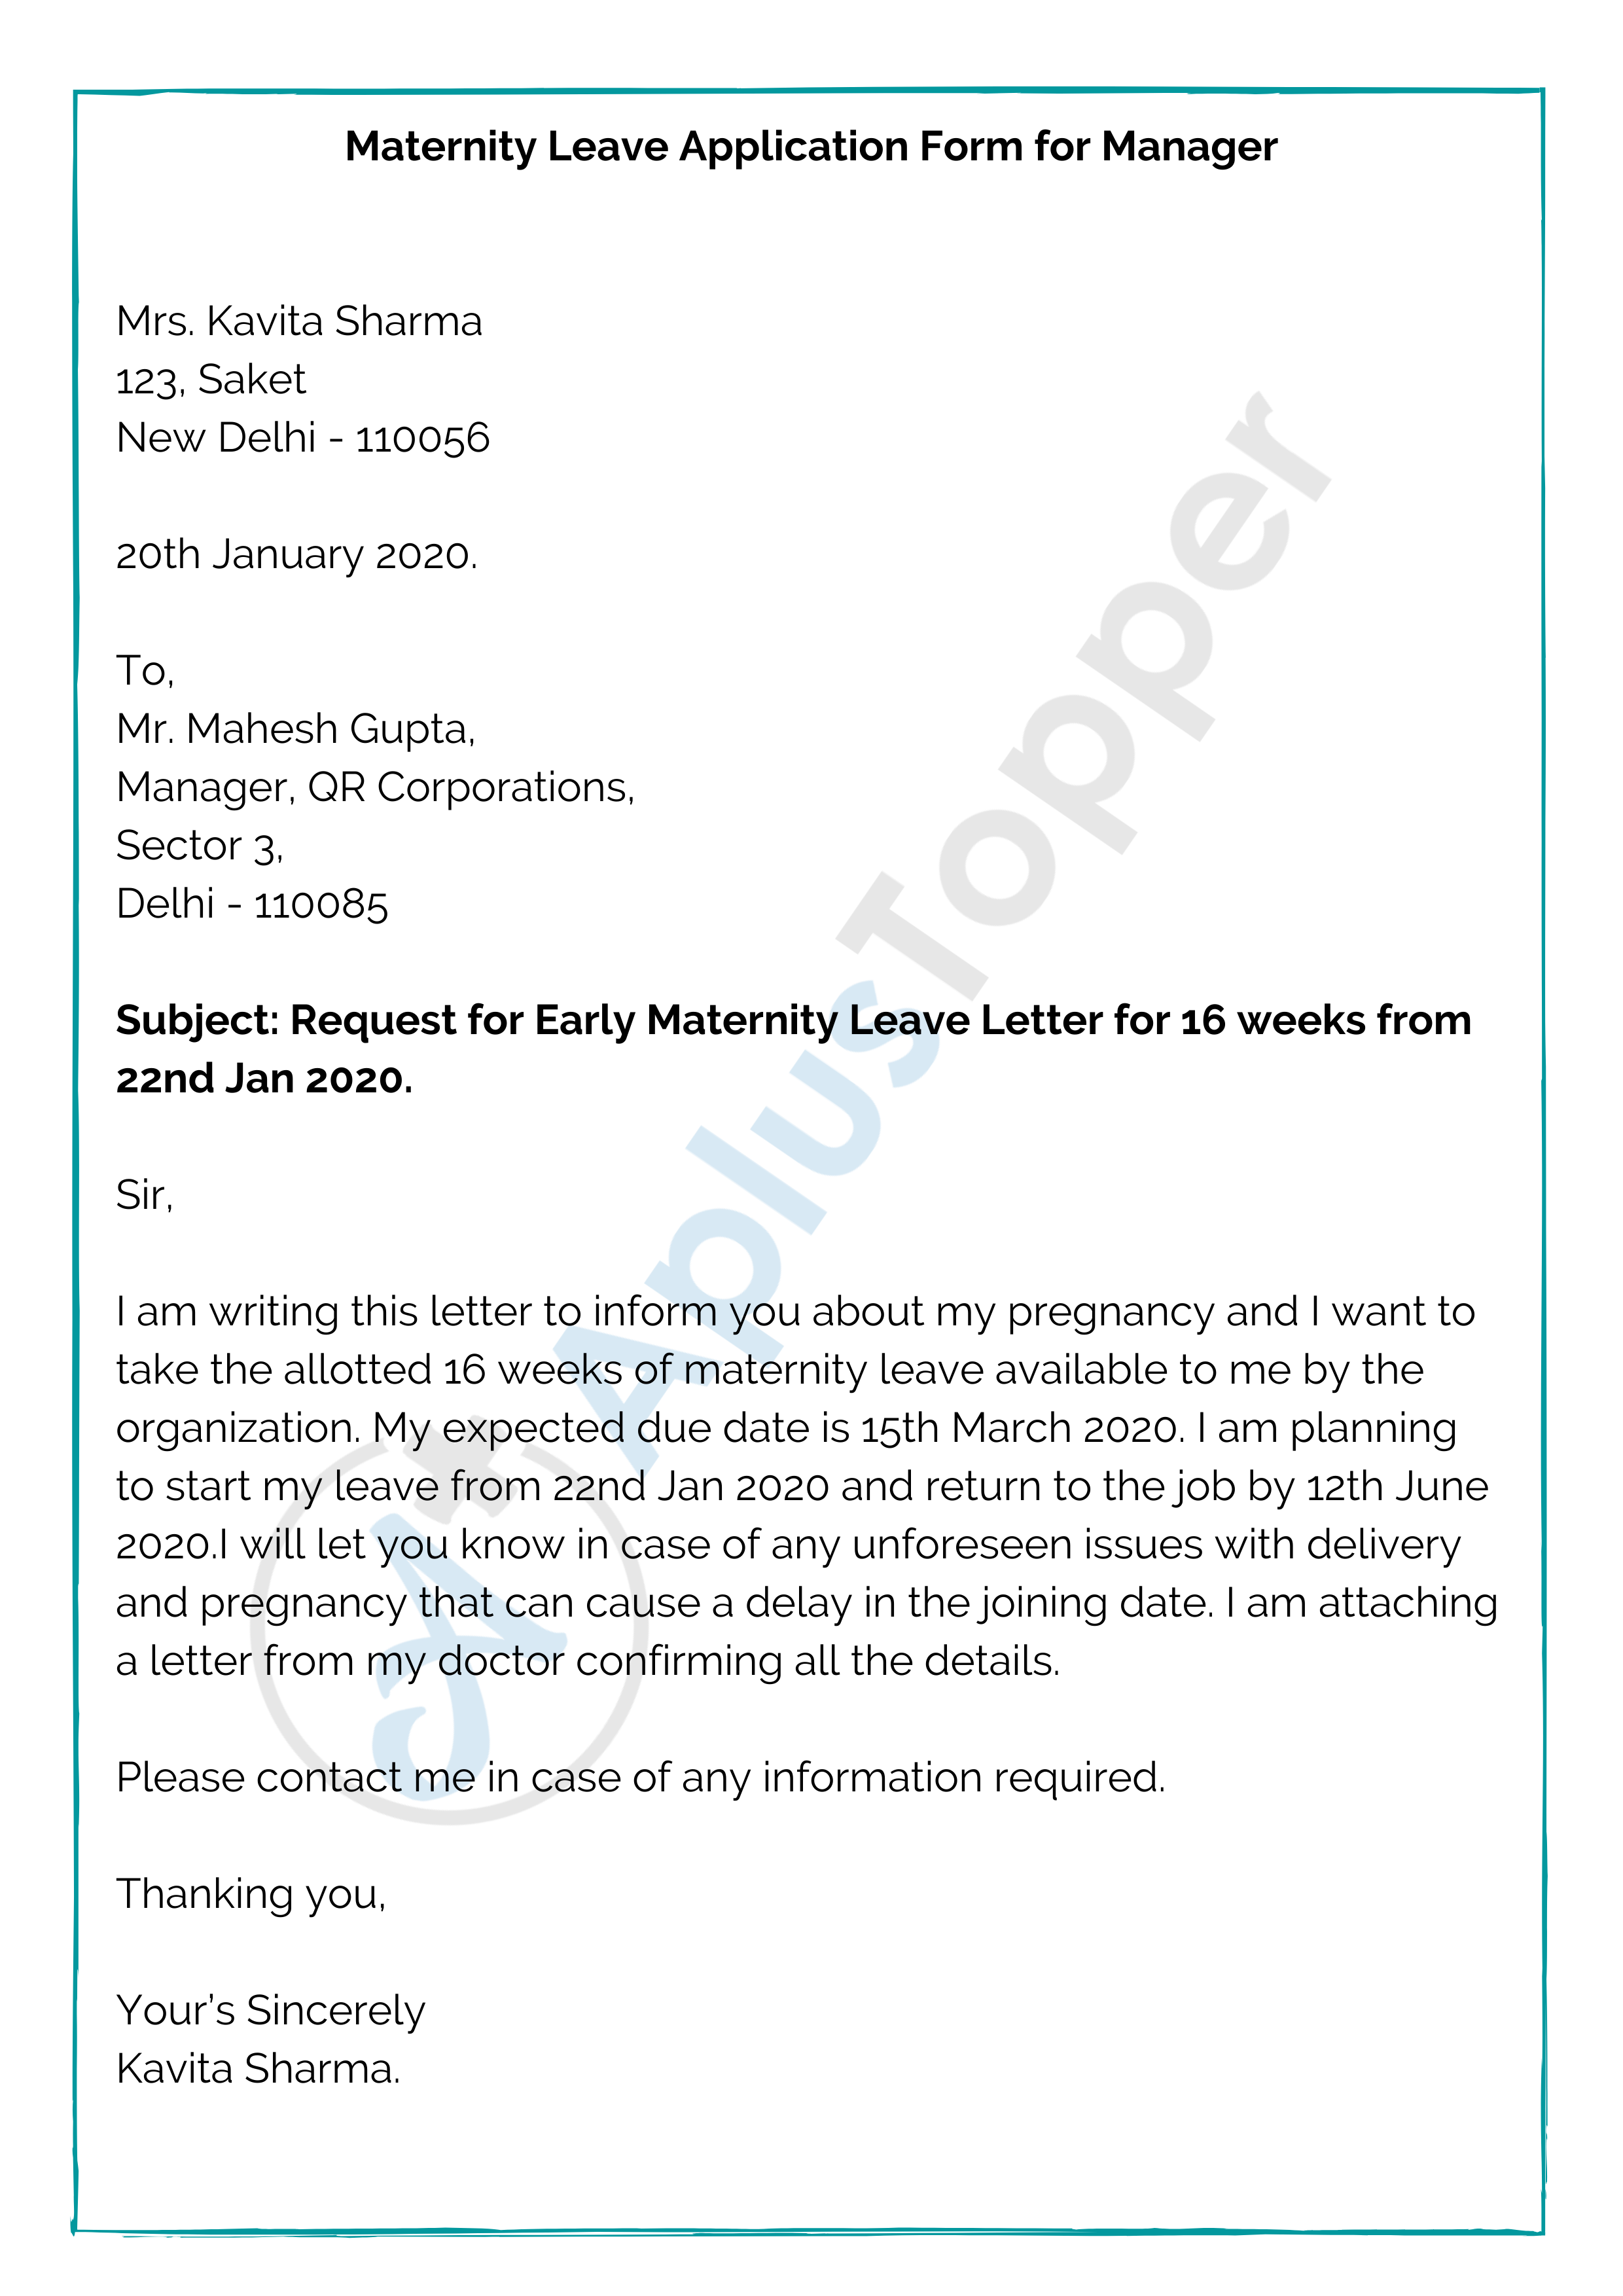 maternity leave application letter after delivery pdf